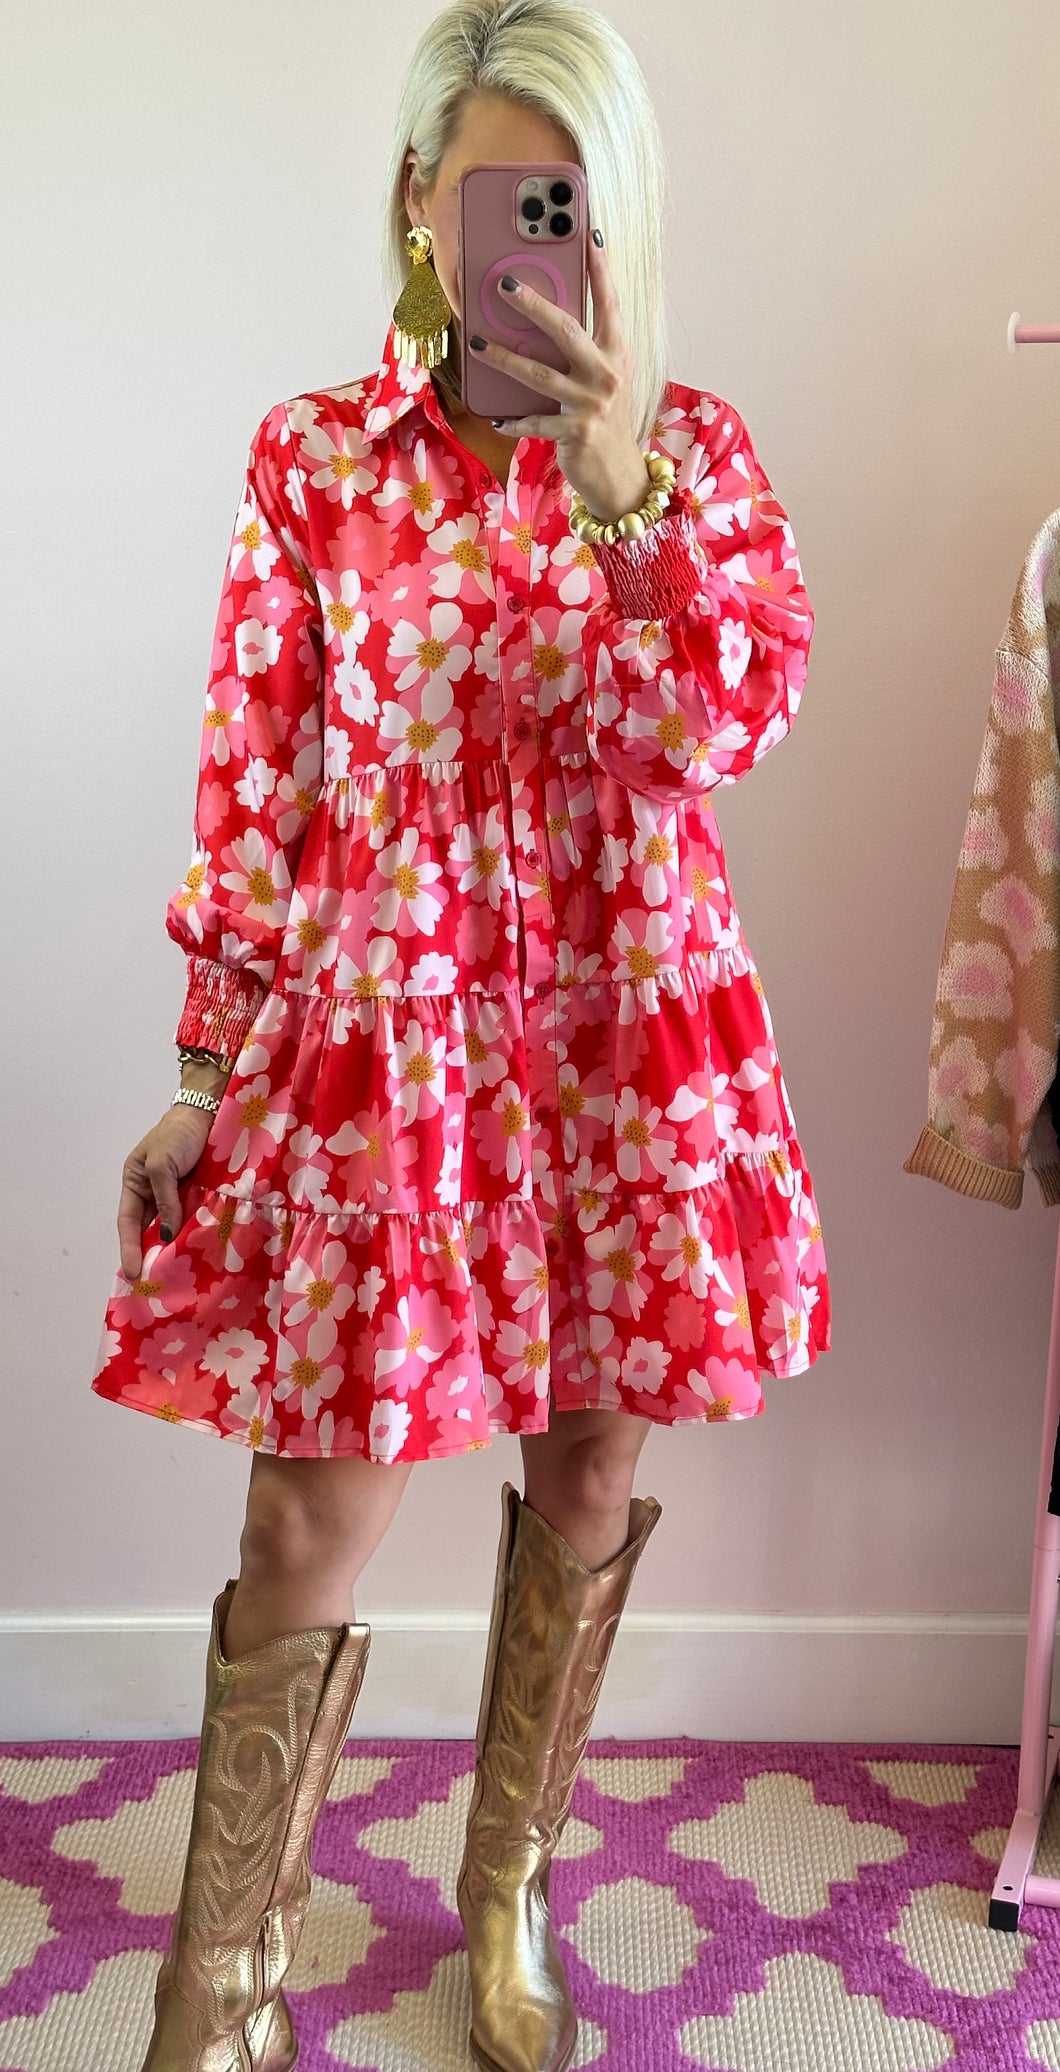 The Floral Dress in Pink & Red Combo